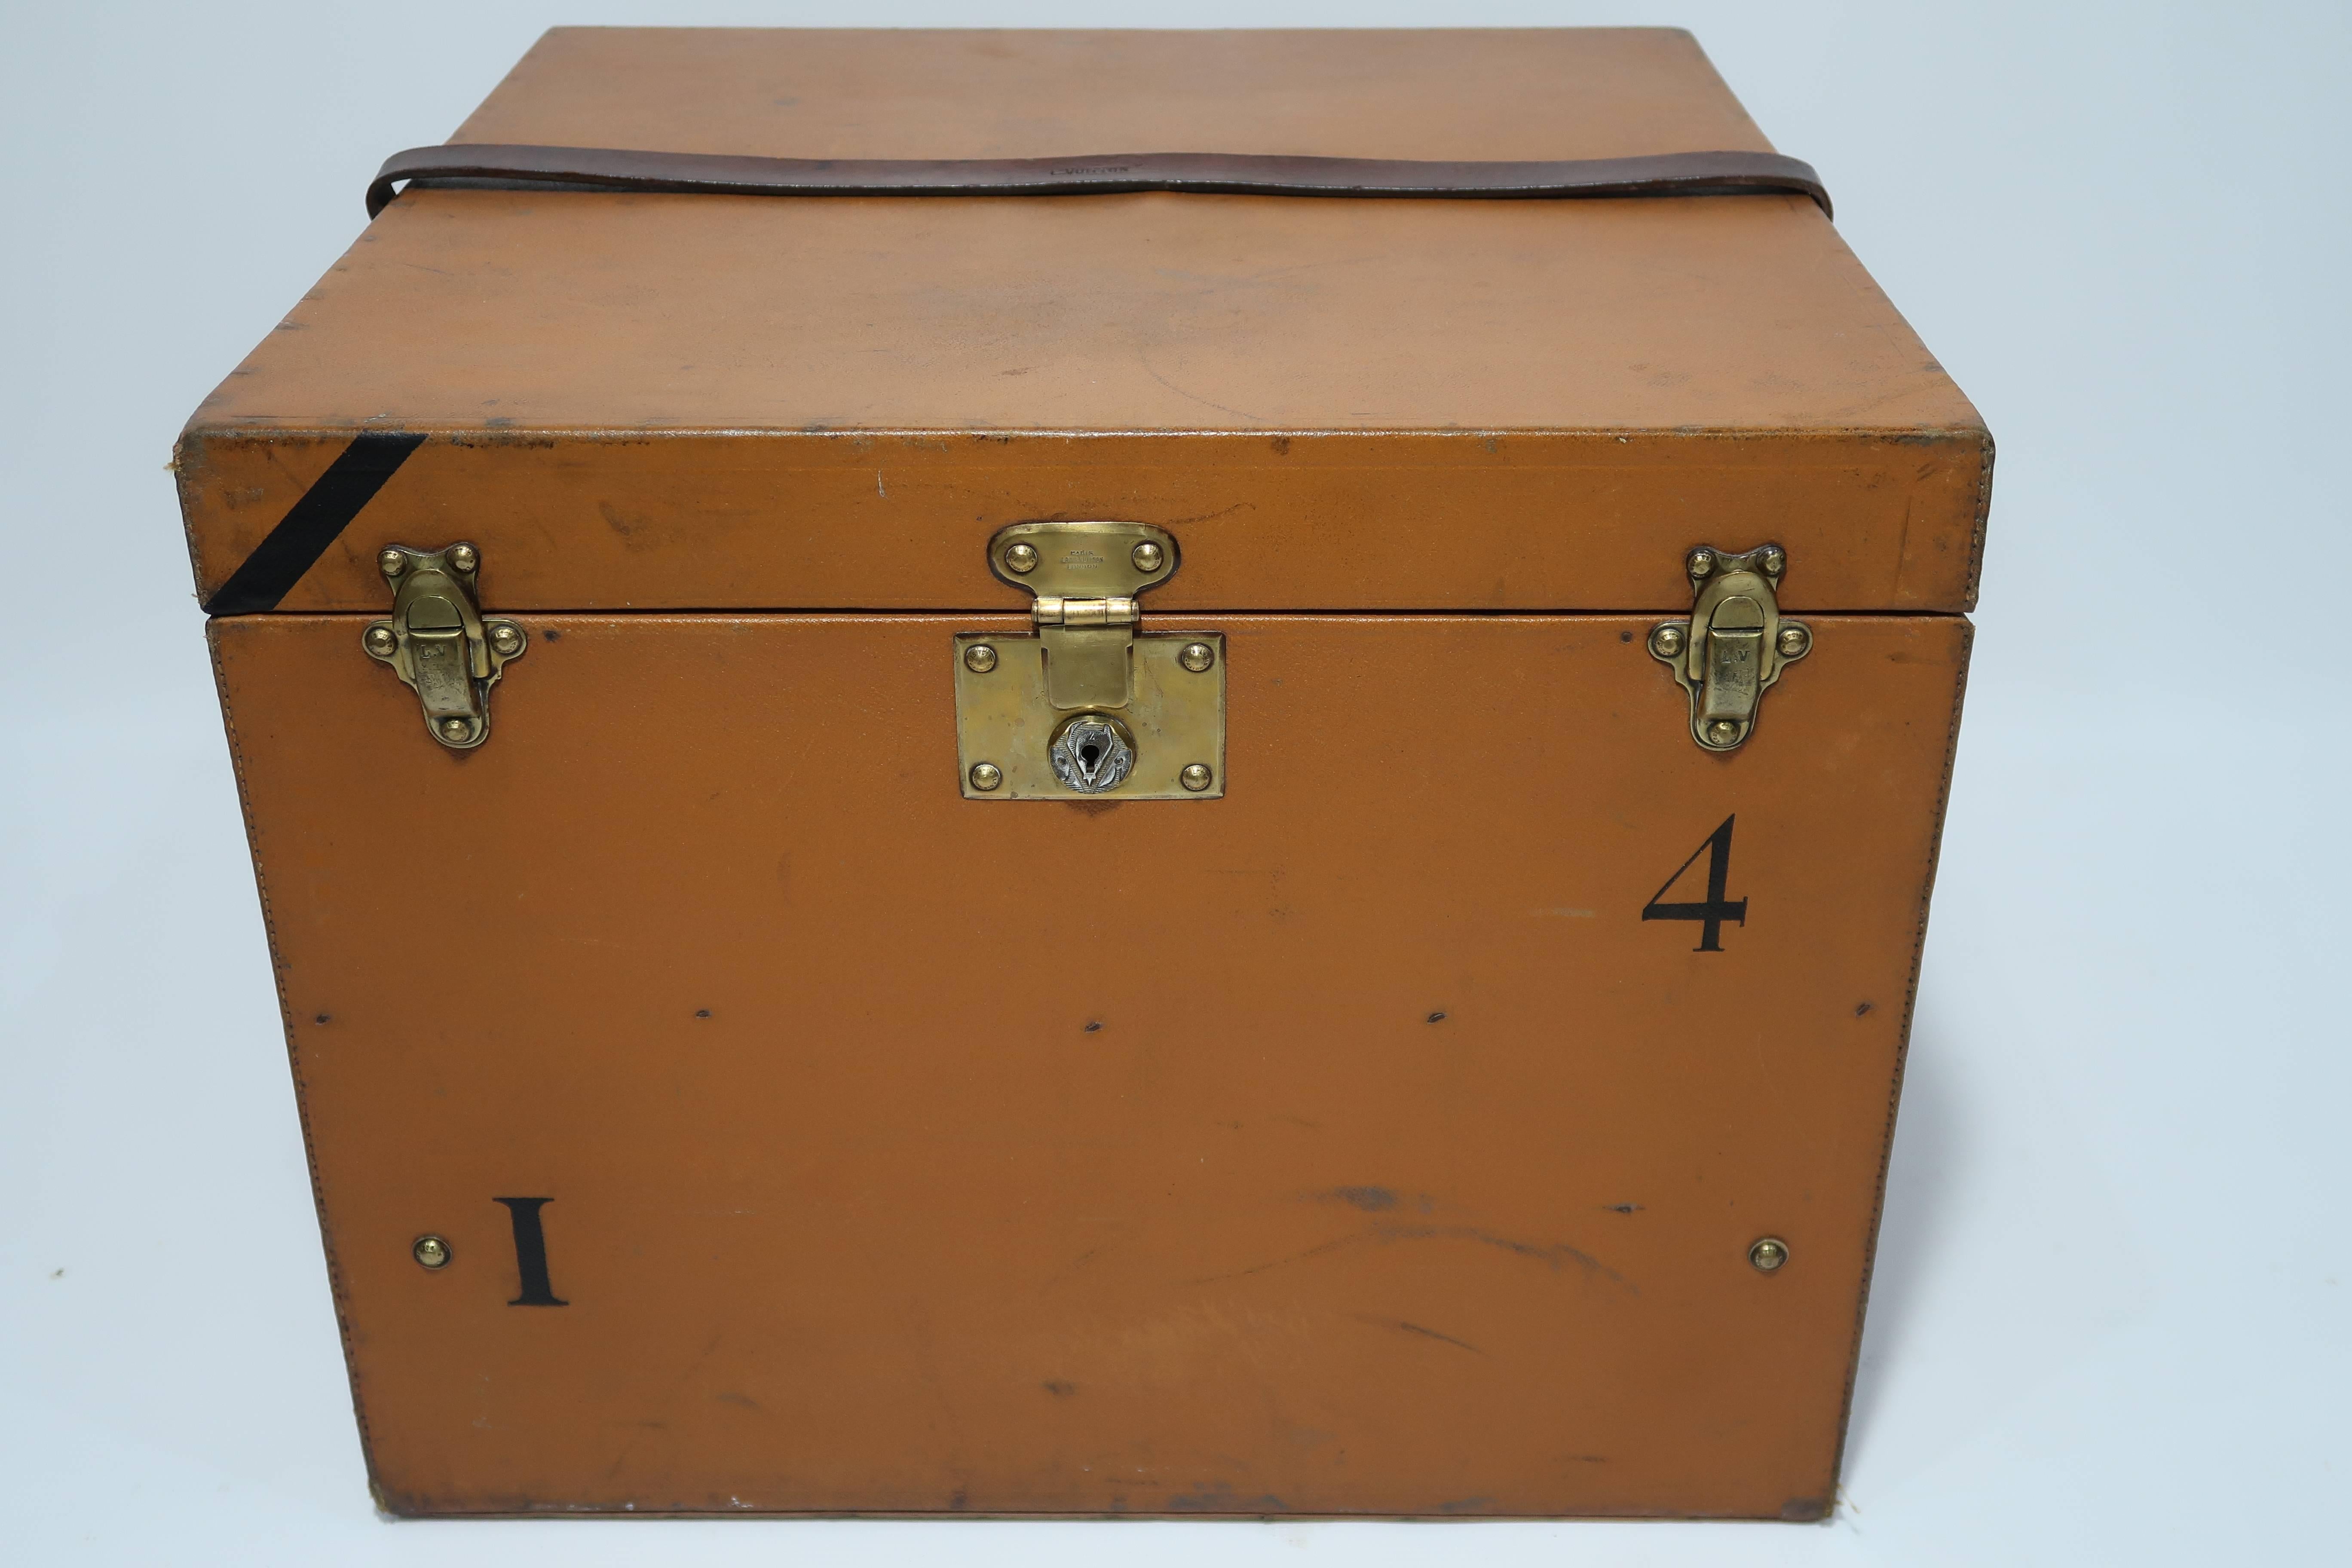 For sale a very rare Louis Vuitton trunk, with air tight closing lid, waterproof and with the rarest LV lock as seen on the photos.

Completely unrestored.

Believed to be one of the trunks that took part on the famous Citroen Black Journey as